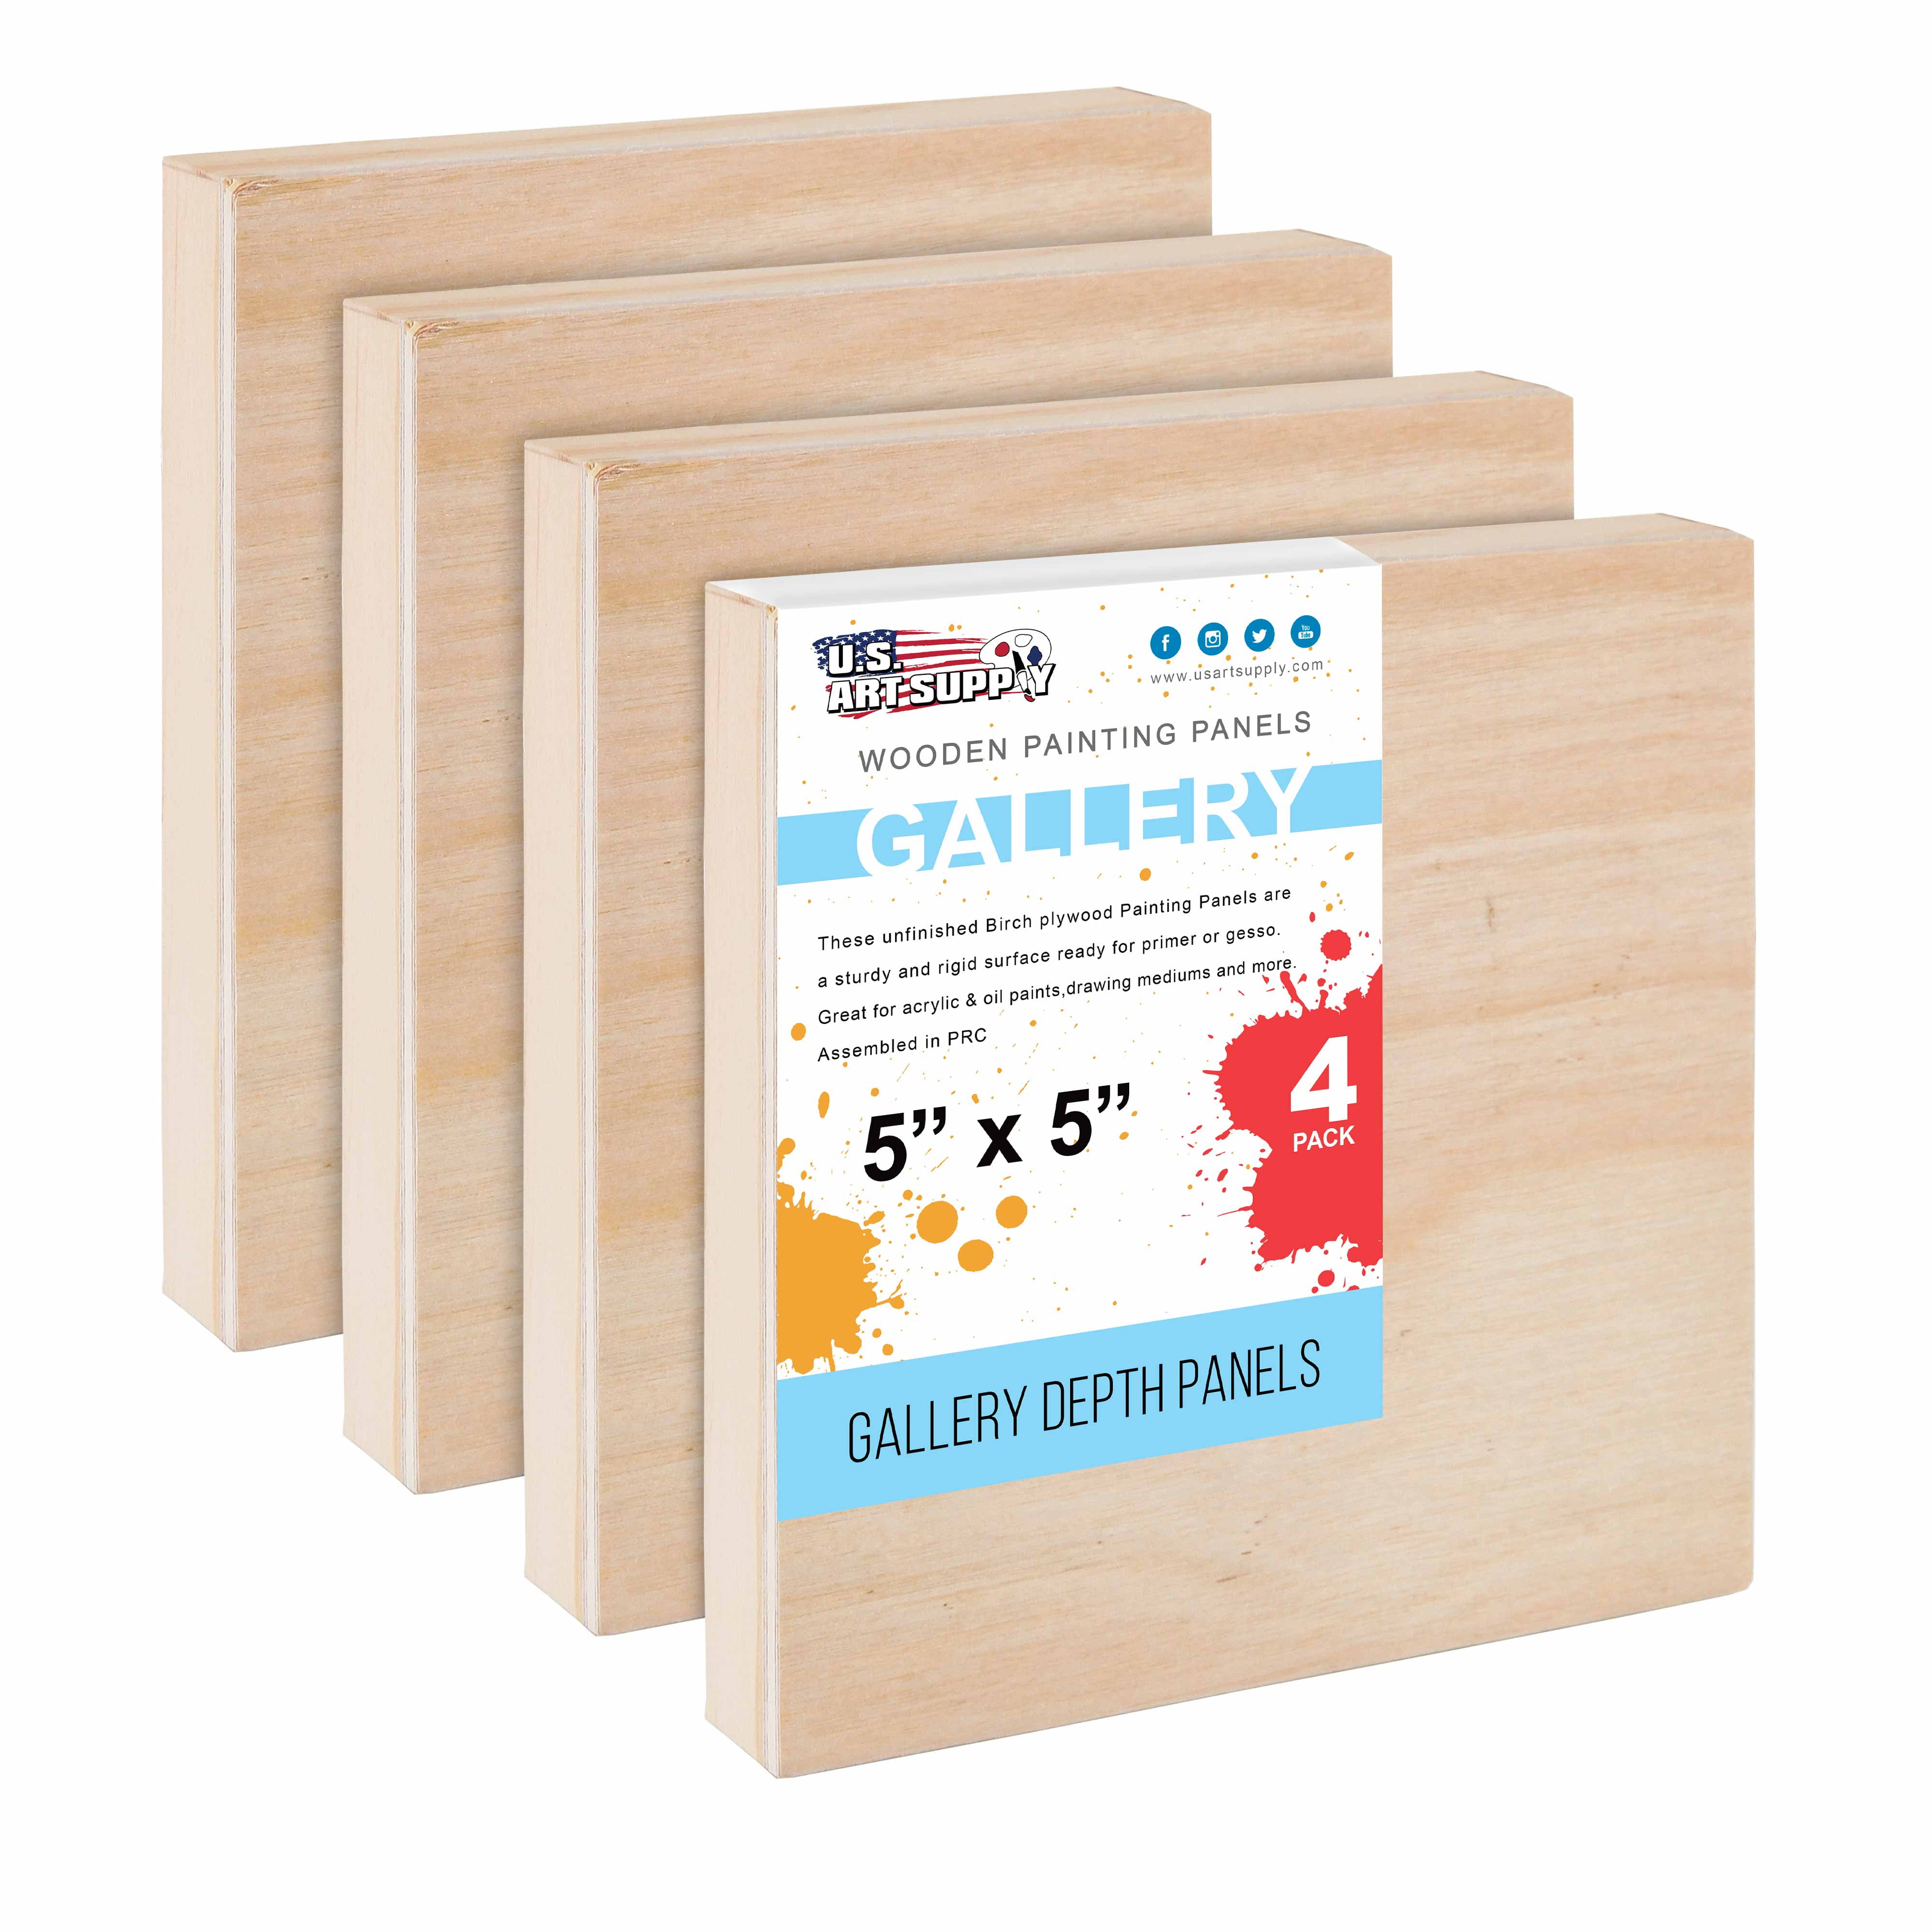 Daveliou 10x10 inch Wood Canvas Craft Supplies Used by Artists for Crafts Painting and Encaustic Art Wooden Painting Board 25 x 25 cm 5-Pack Birch Wood Cradle Panel Boards 